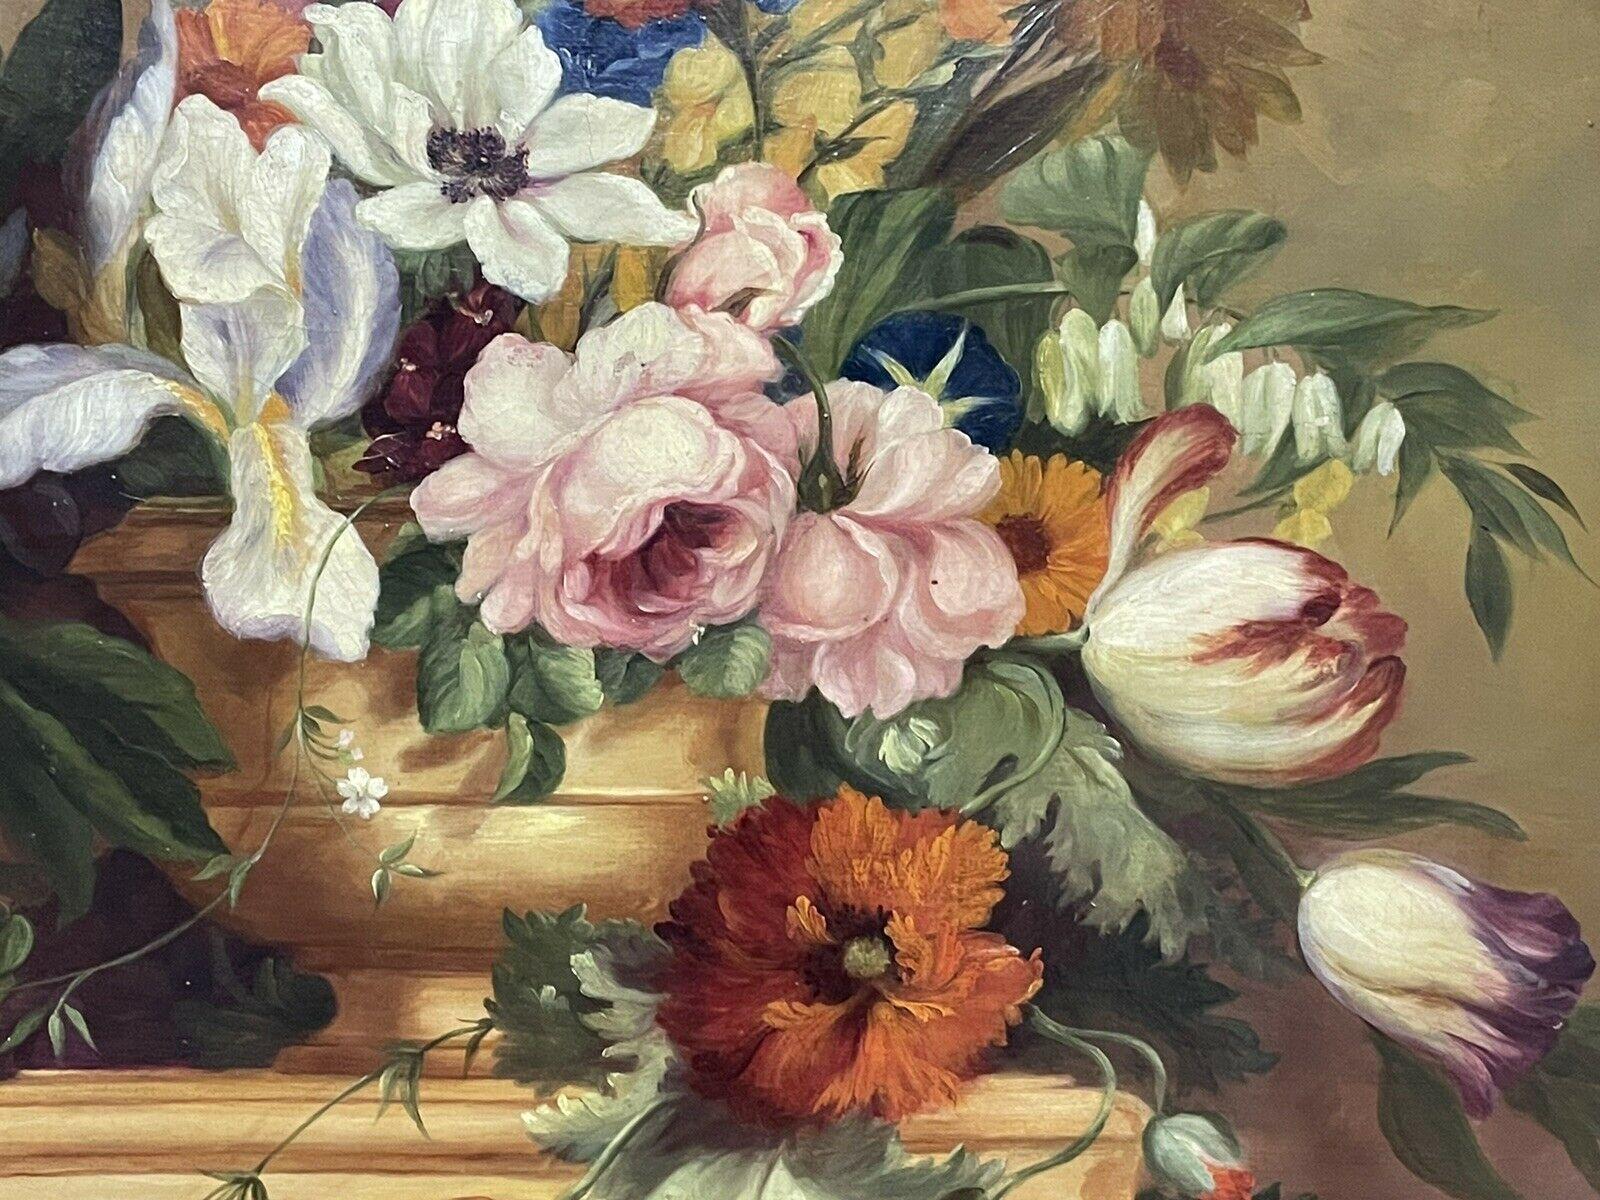 FINE ENGLISH CLASSICAL STILL LIFE OIL PAINTING - ORNATE FLOWERS IN VASE/ PLINTH 1